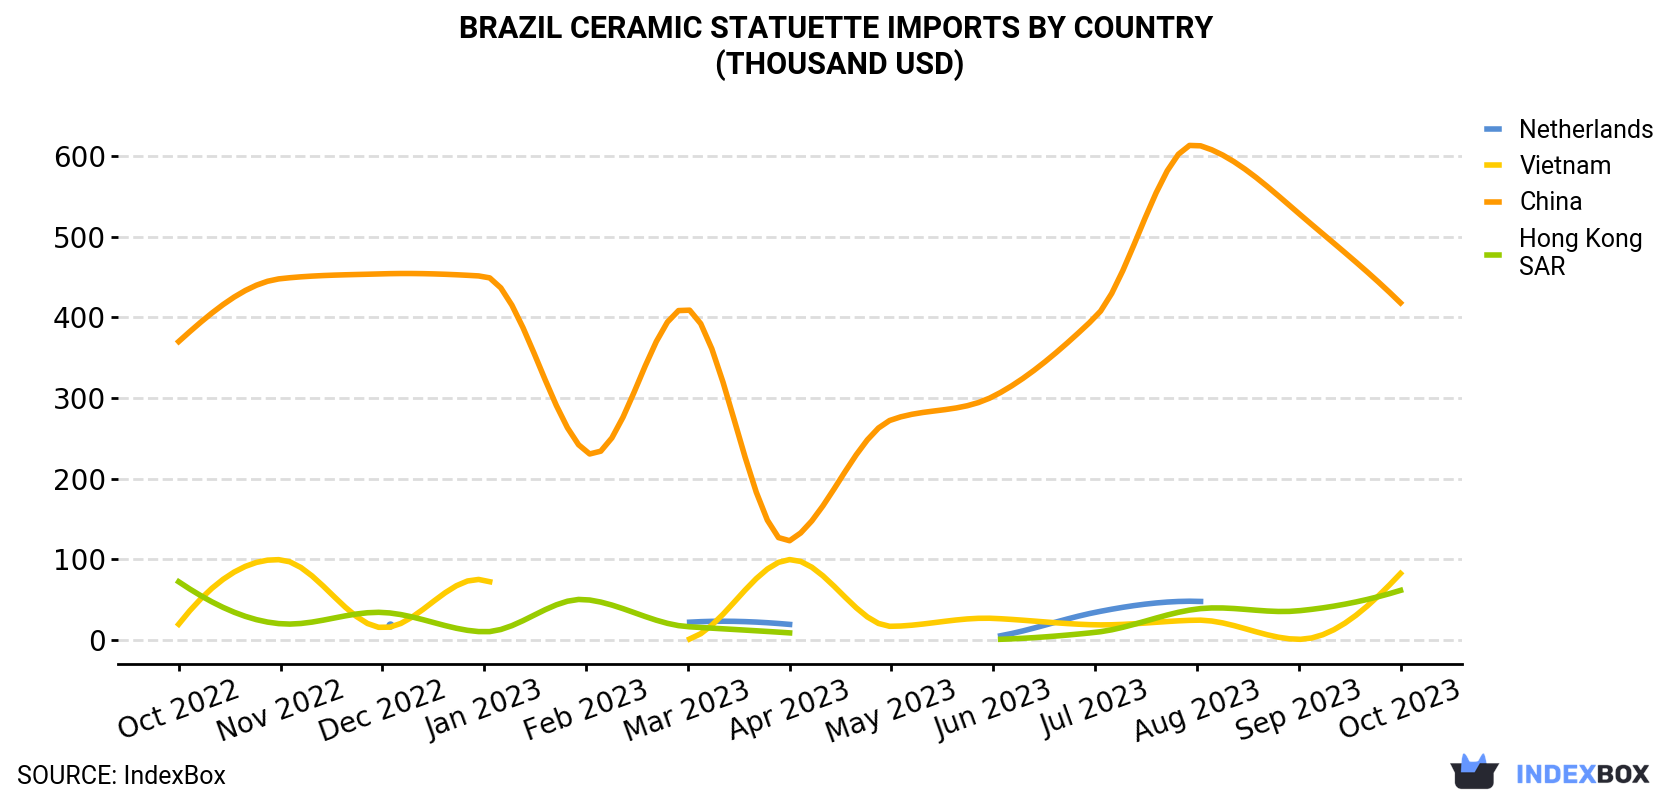 Brazil Ceramic Statuette Imports By Country (Thousand USD)